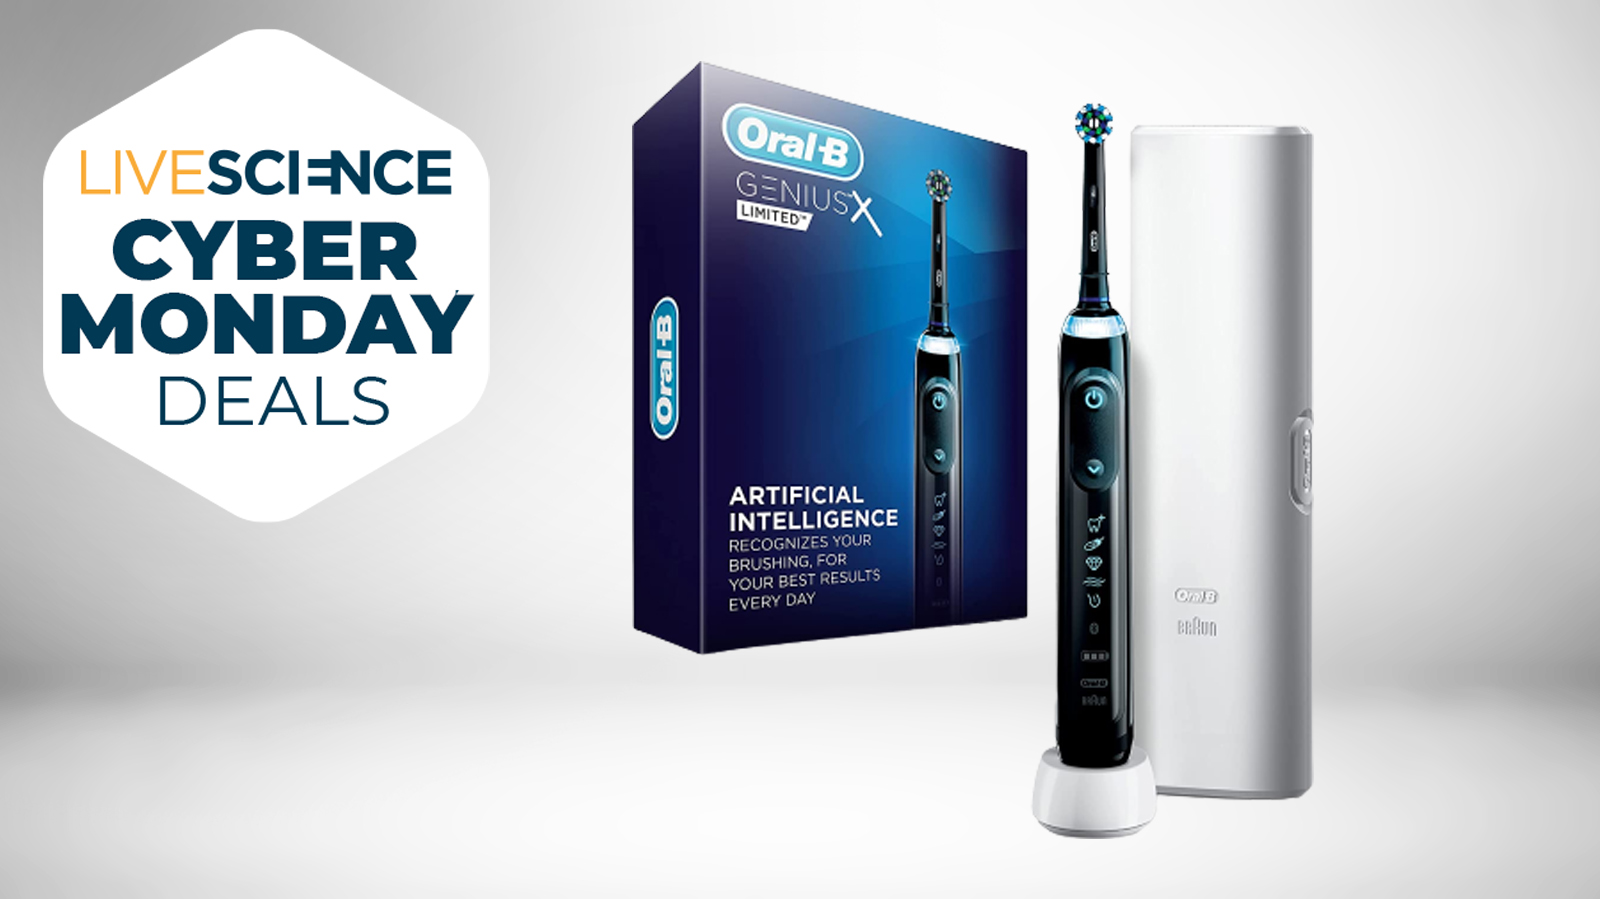 Kano Onvermijdelijk lood Huge saving! Get 50% off the Oral-B Genius X Limited electric toothbrush  this Cyber Monday | Live Science